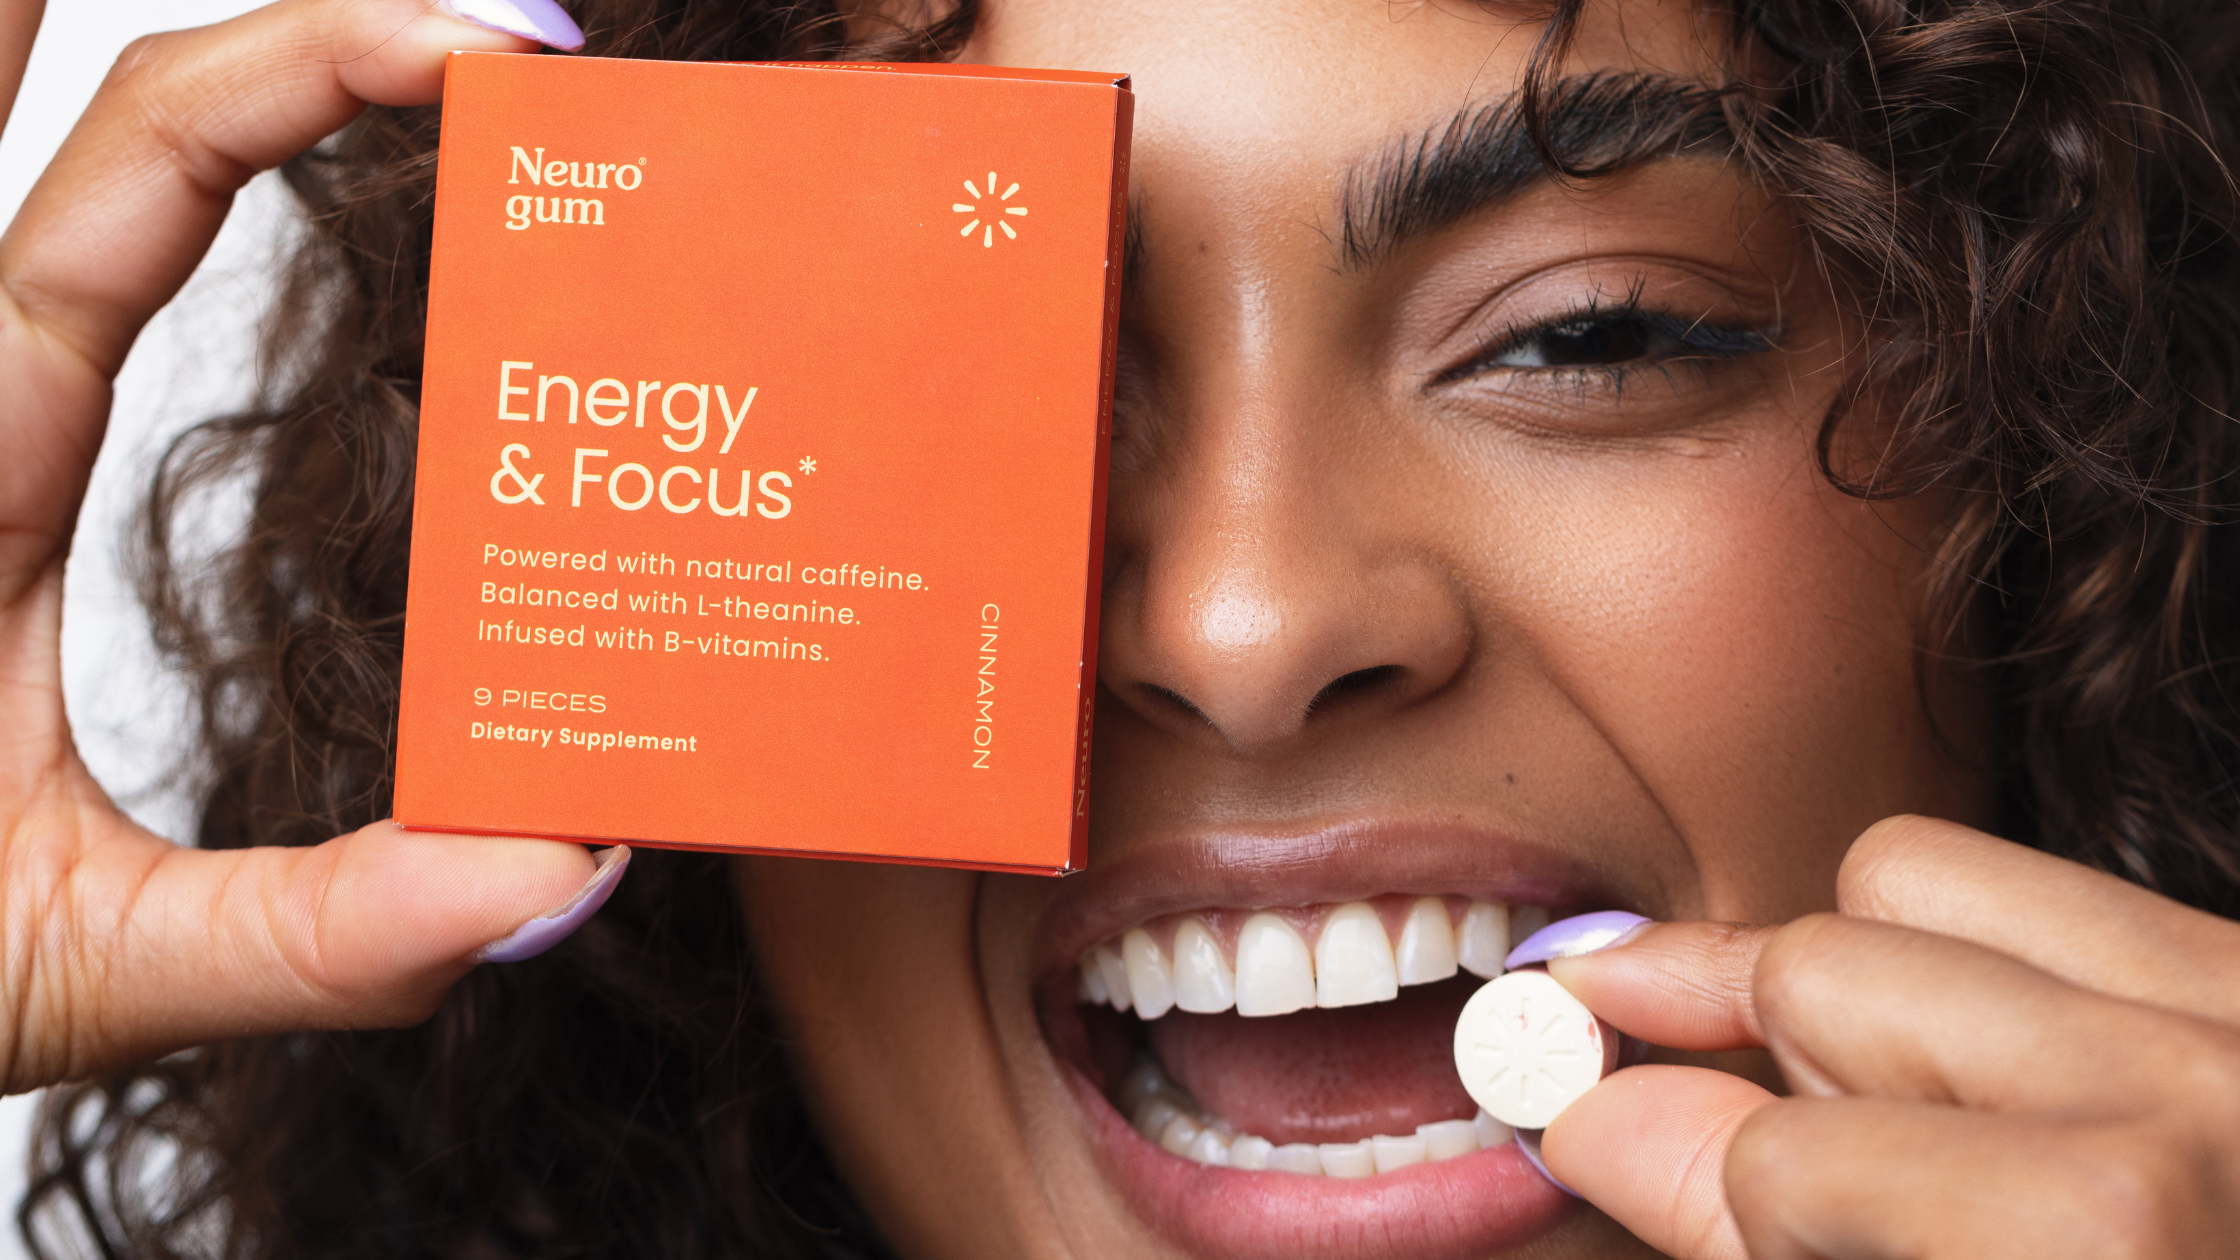 The Journey of Neuro Gum: From Concept to Shelf